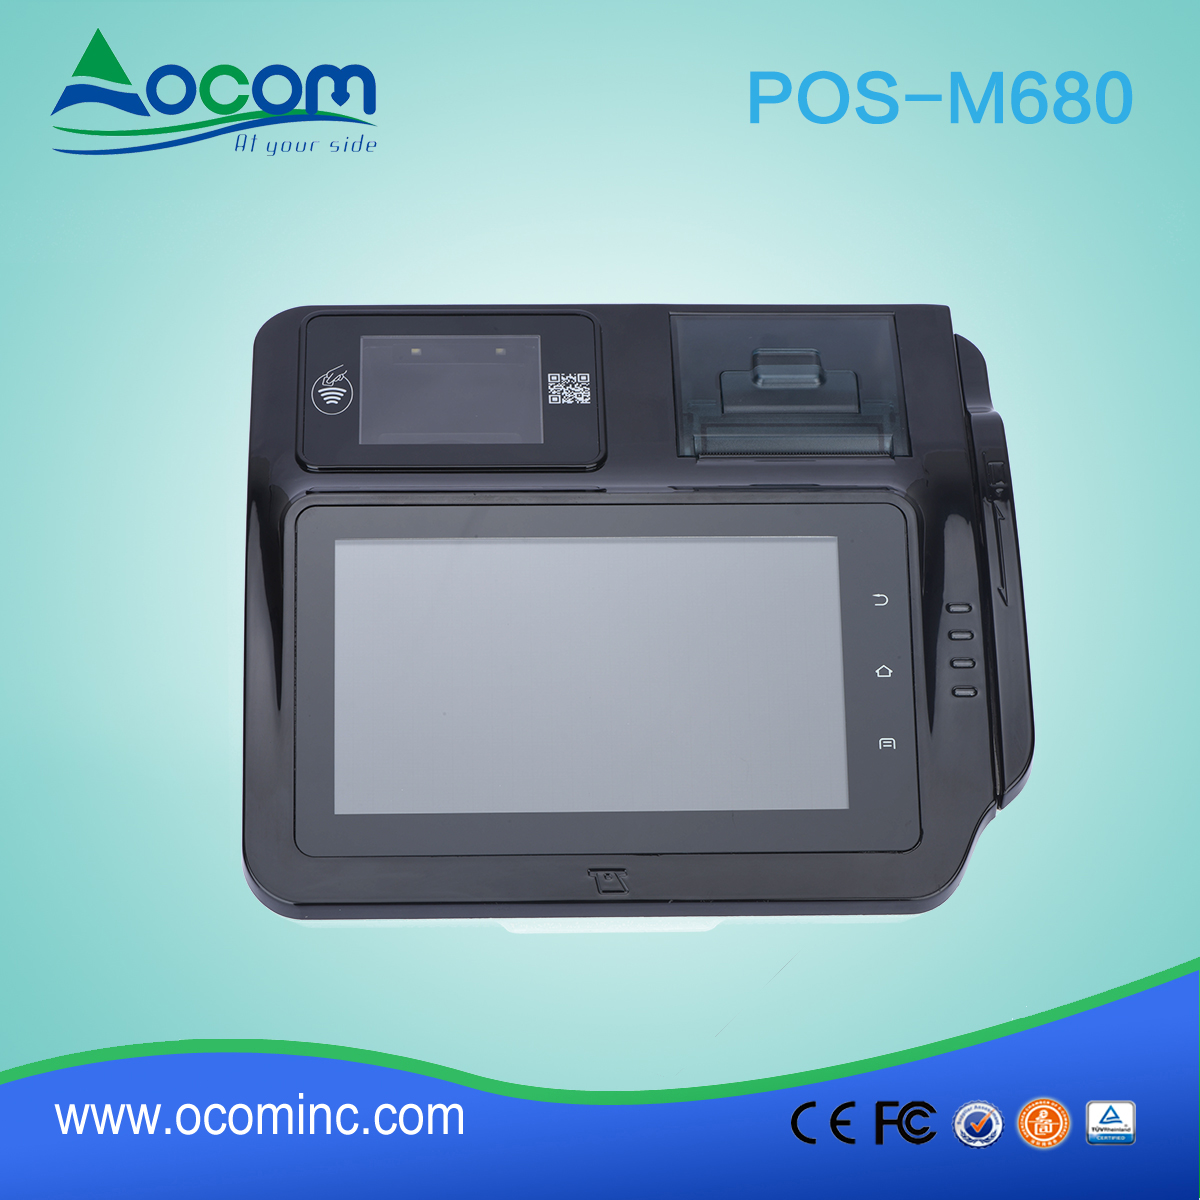 (POS-M680) Android POS Terminal With Thermal Printer